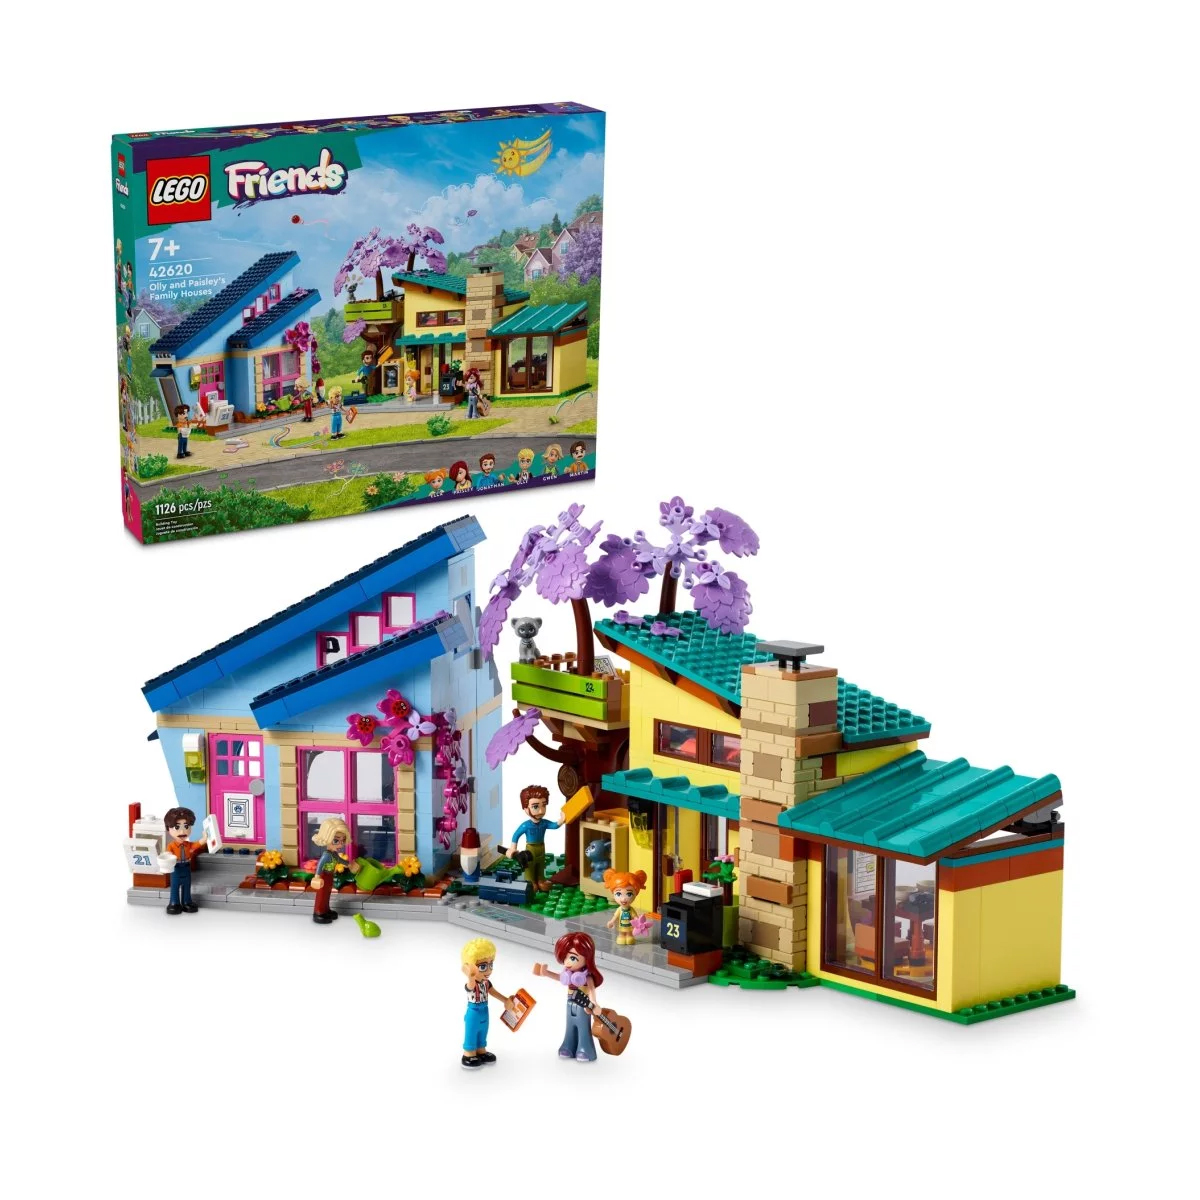 Конструктор Lego Friends Olly and Paisley's Family Houses 42620, 1126 деталей конструктор lego friends olly and paisley s family houses 42620 1126 деталей